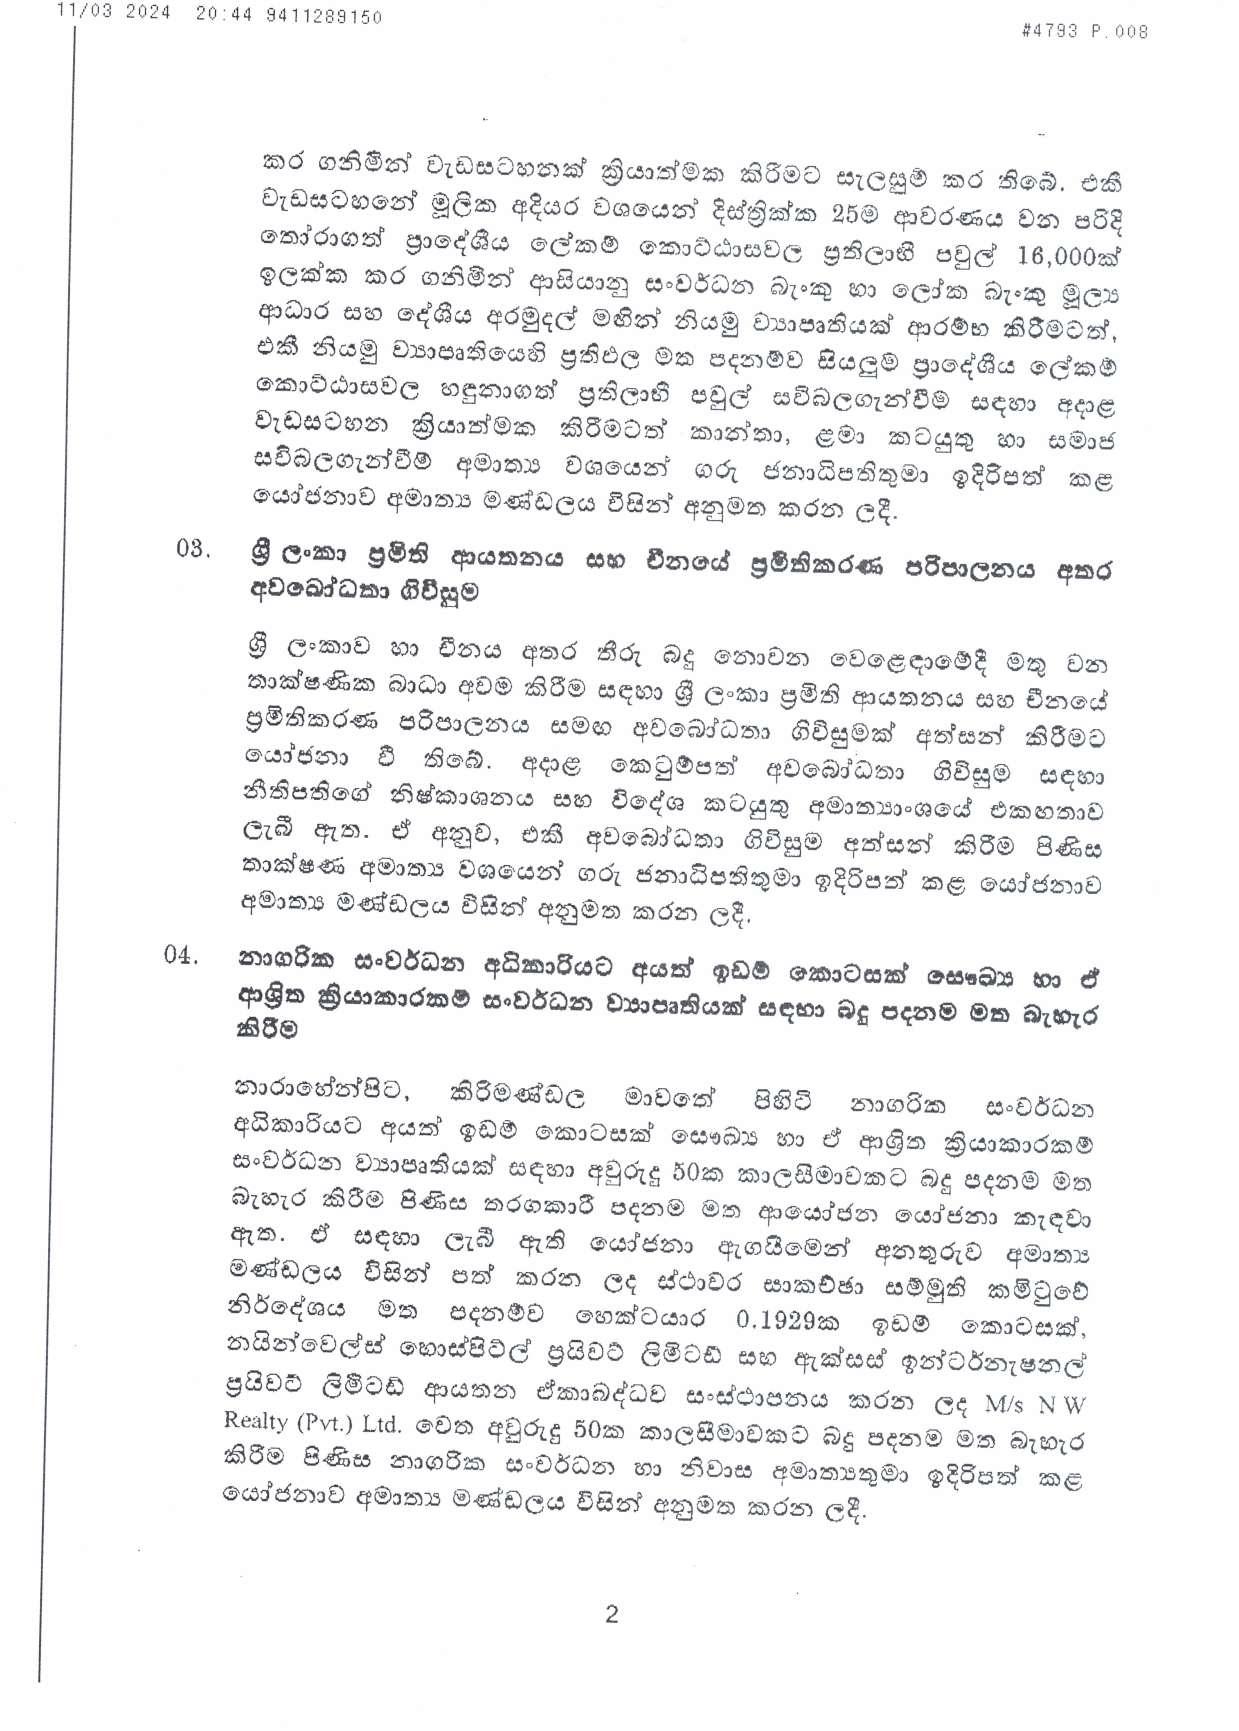 Cabinet Decision on 11.03.2024 page 002